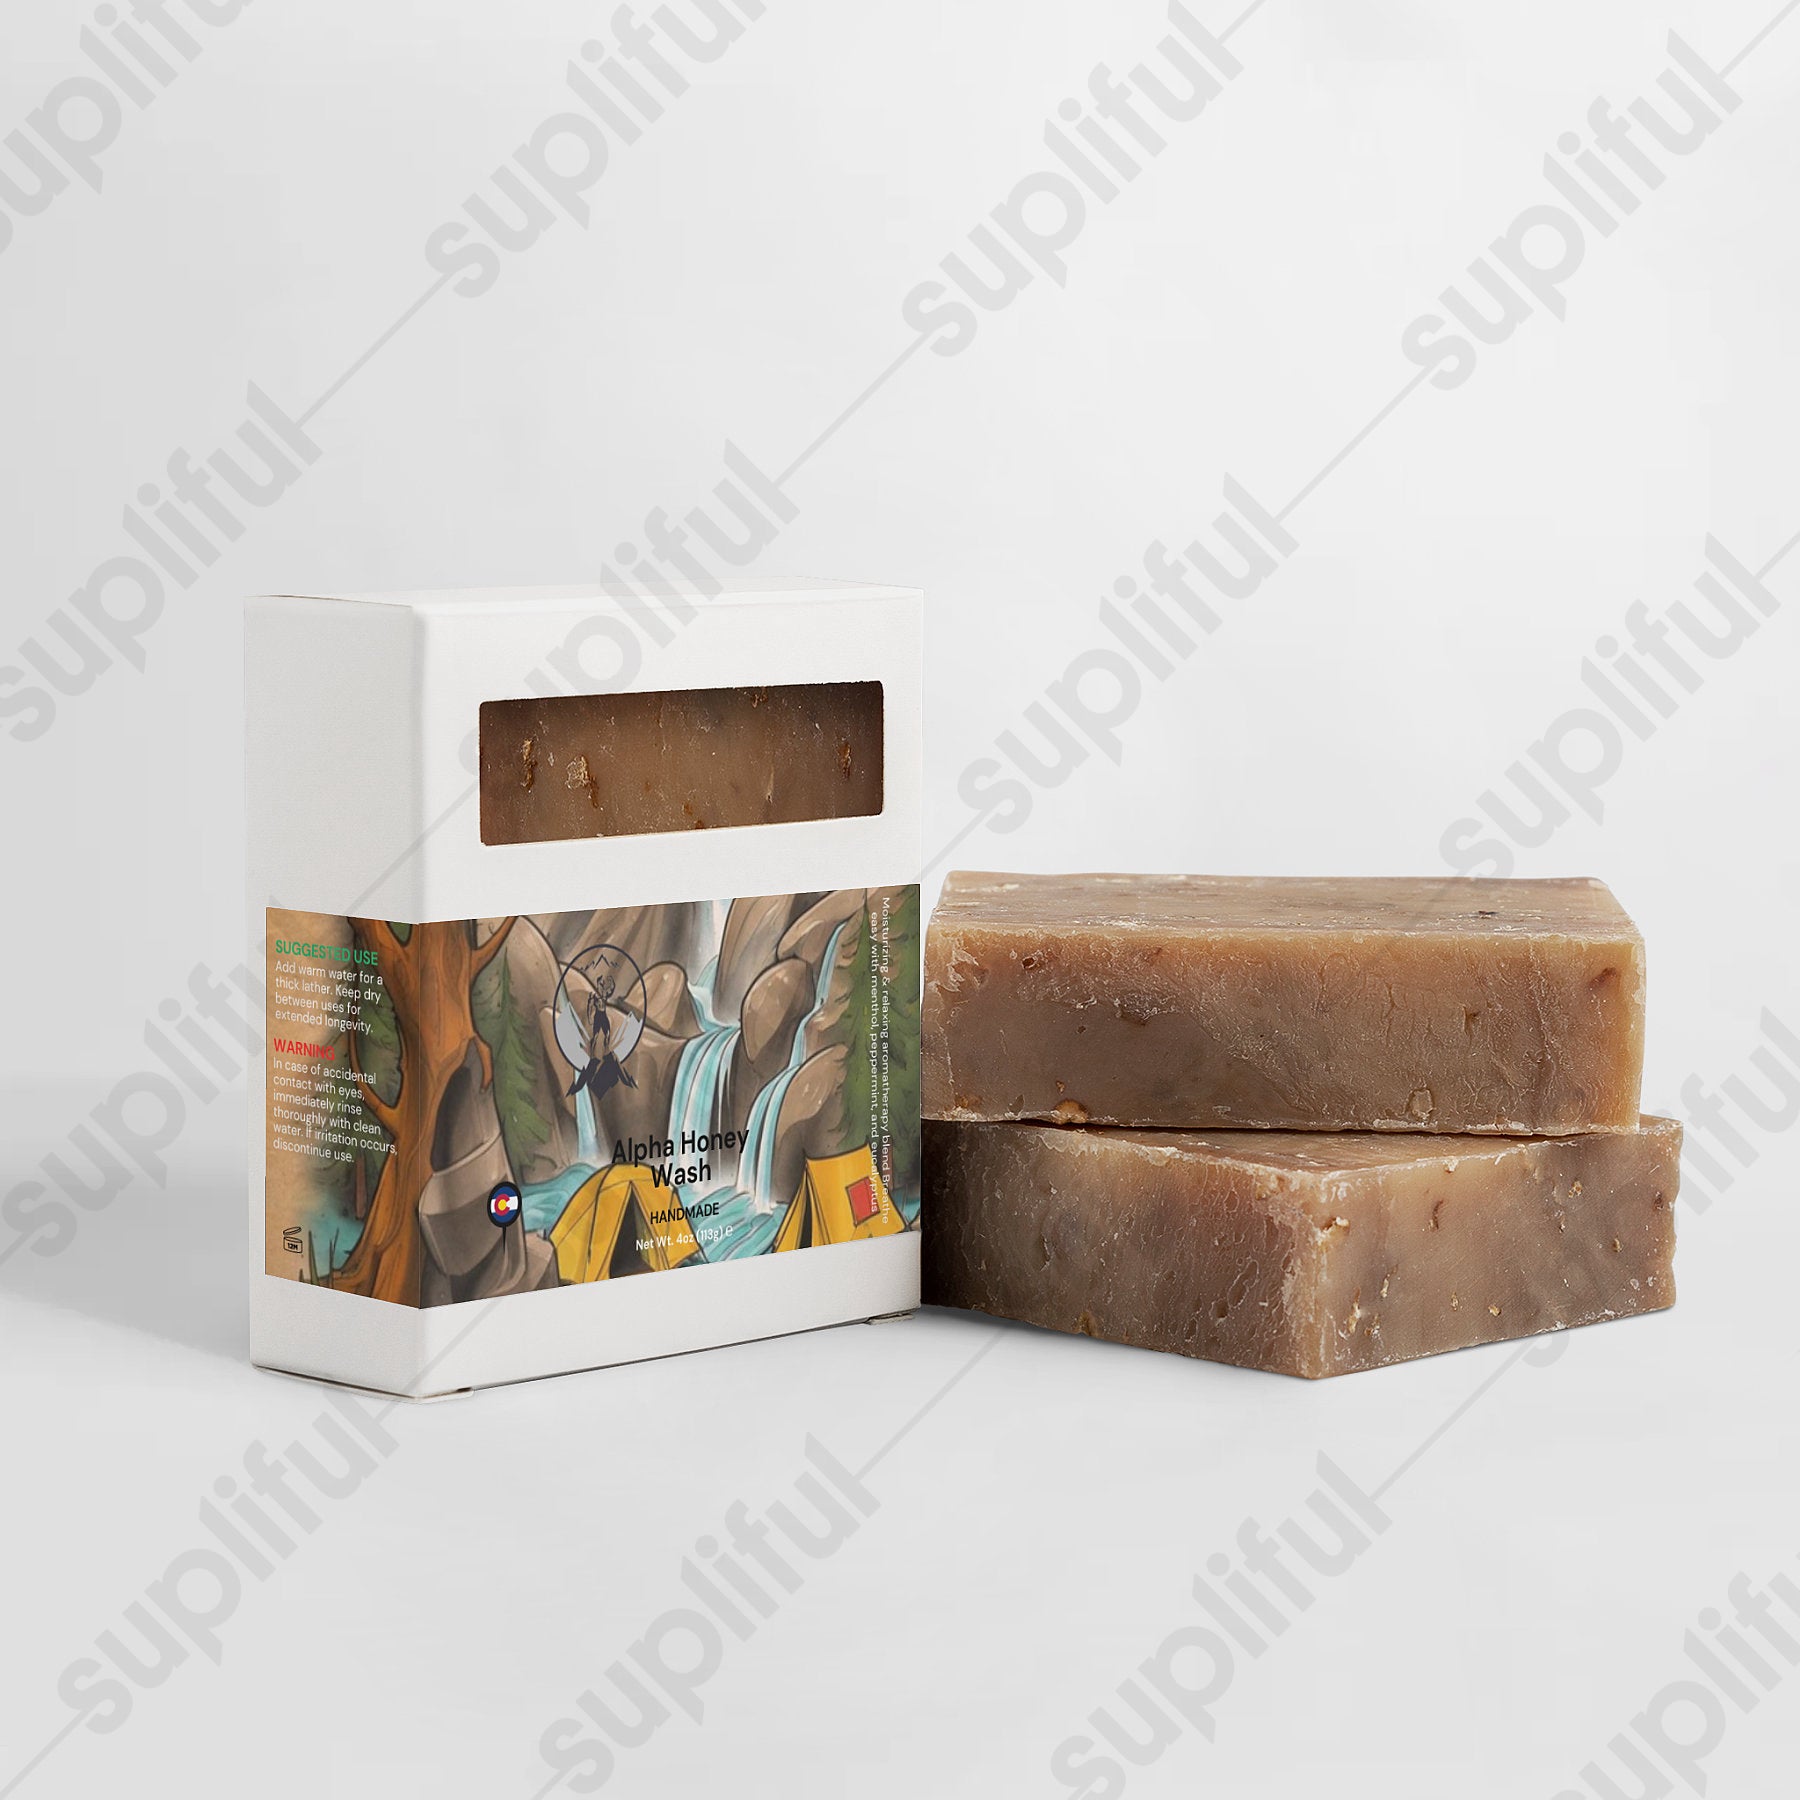 Alpha Honey WashPersonal Care and BeautyIndulge in the soothing goodness of our Handmade Oat Milk Honey Soap—a gentle and natural skincare solution tailored to pamper sensitive skin with the utmost care.KeAlpha Honey WashThe Rocky Ranger